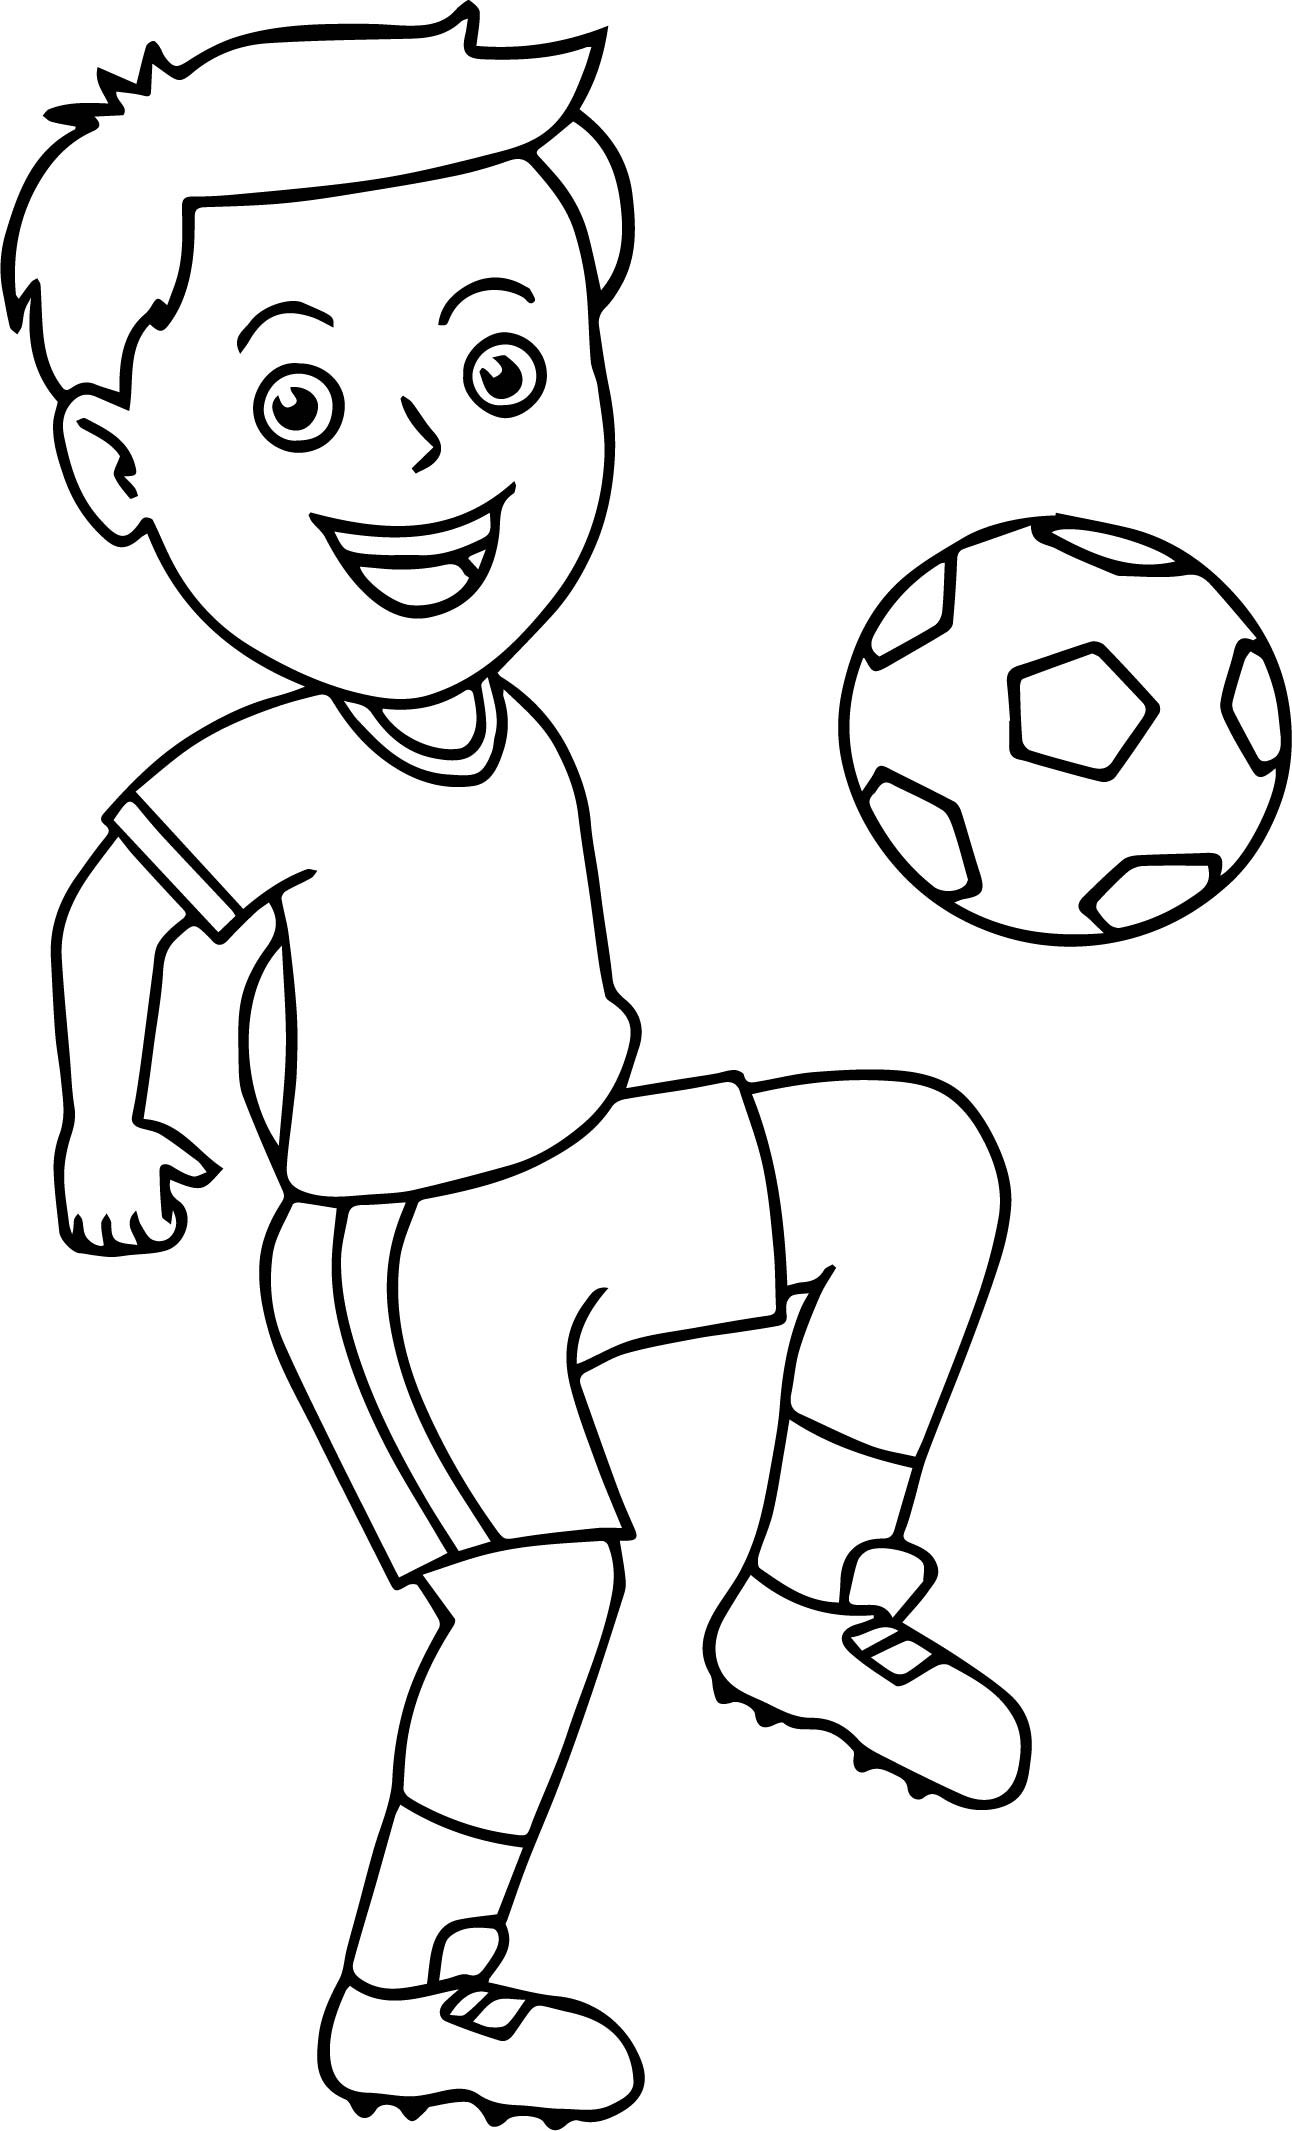 Coloring Sheets For Boys Soccer
 Coloring Page Boy Playing Soccer